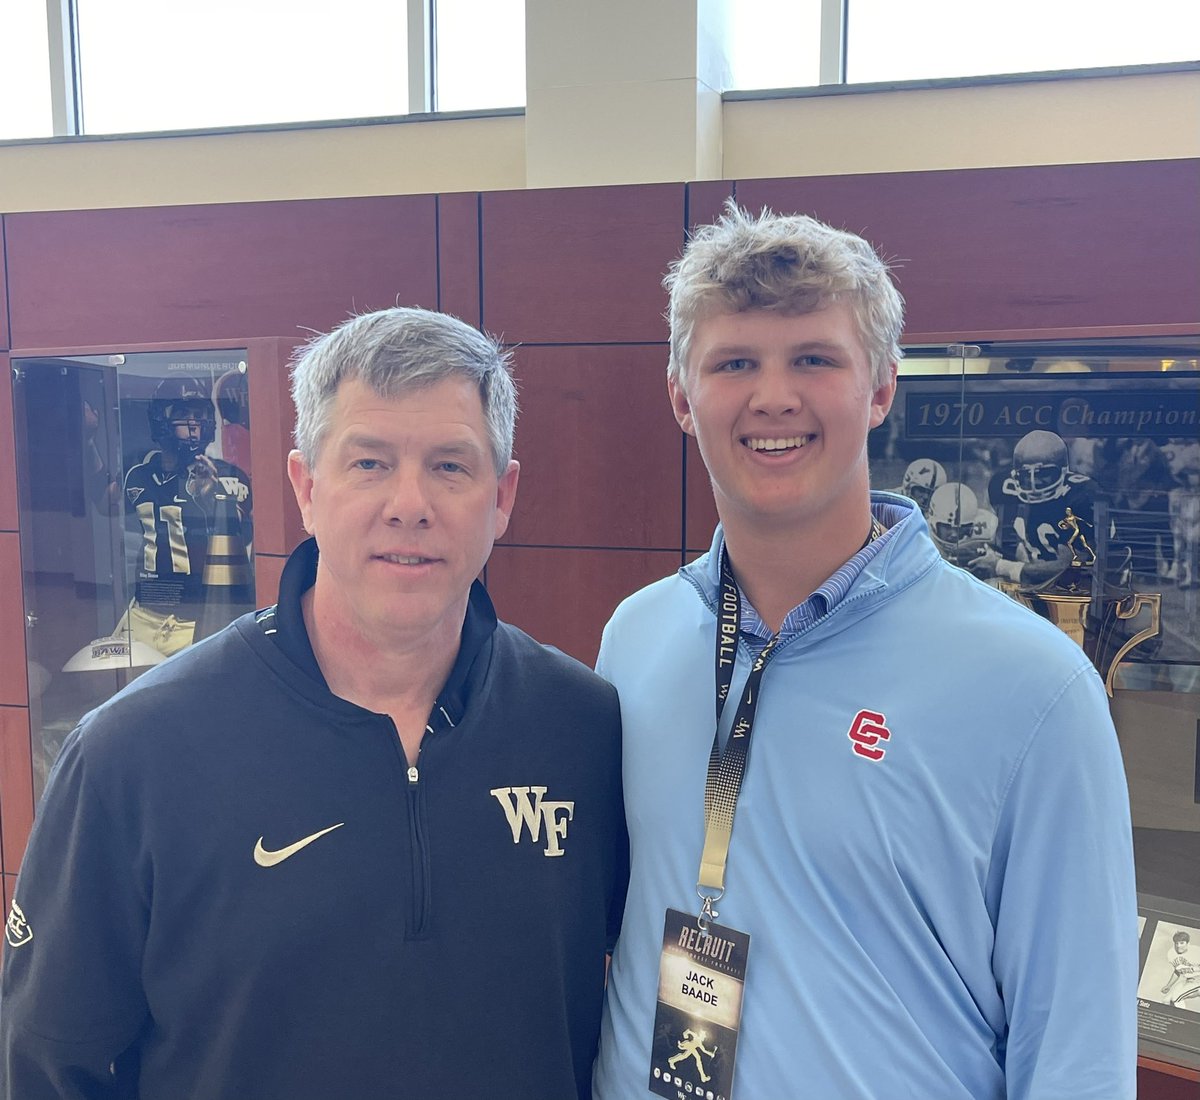 Had a fantastic Junior Day @WakeFB. Excellent program and coaches. Thank you @WayneLineburg and @Coach_Mono for the great tour and info. Looking forward to camp. #GoDeacs @CMontgomeryLS @DanOrnerKicking @Catholic_FB